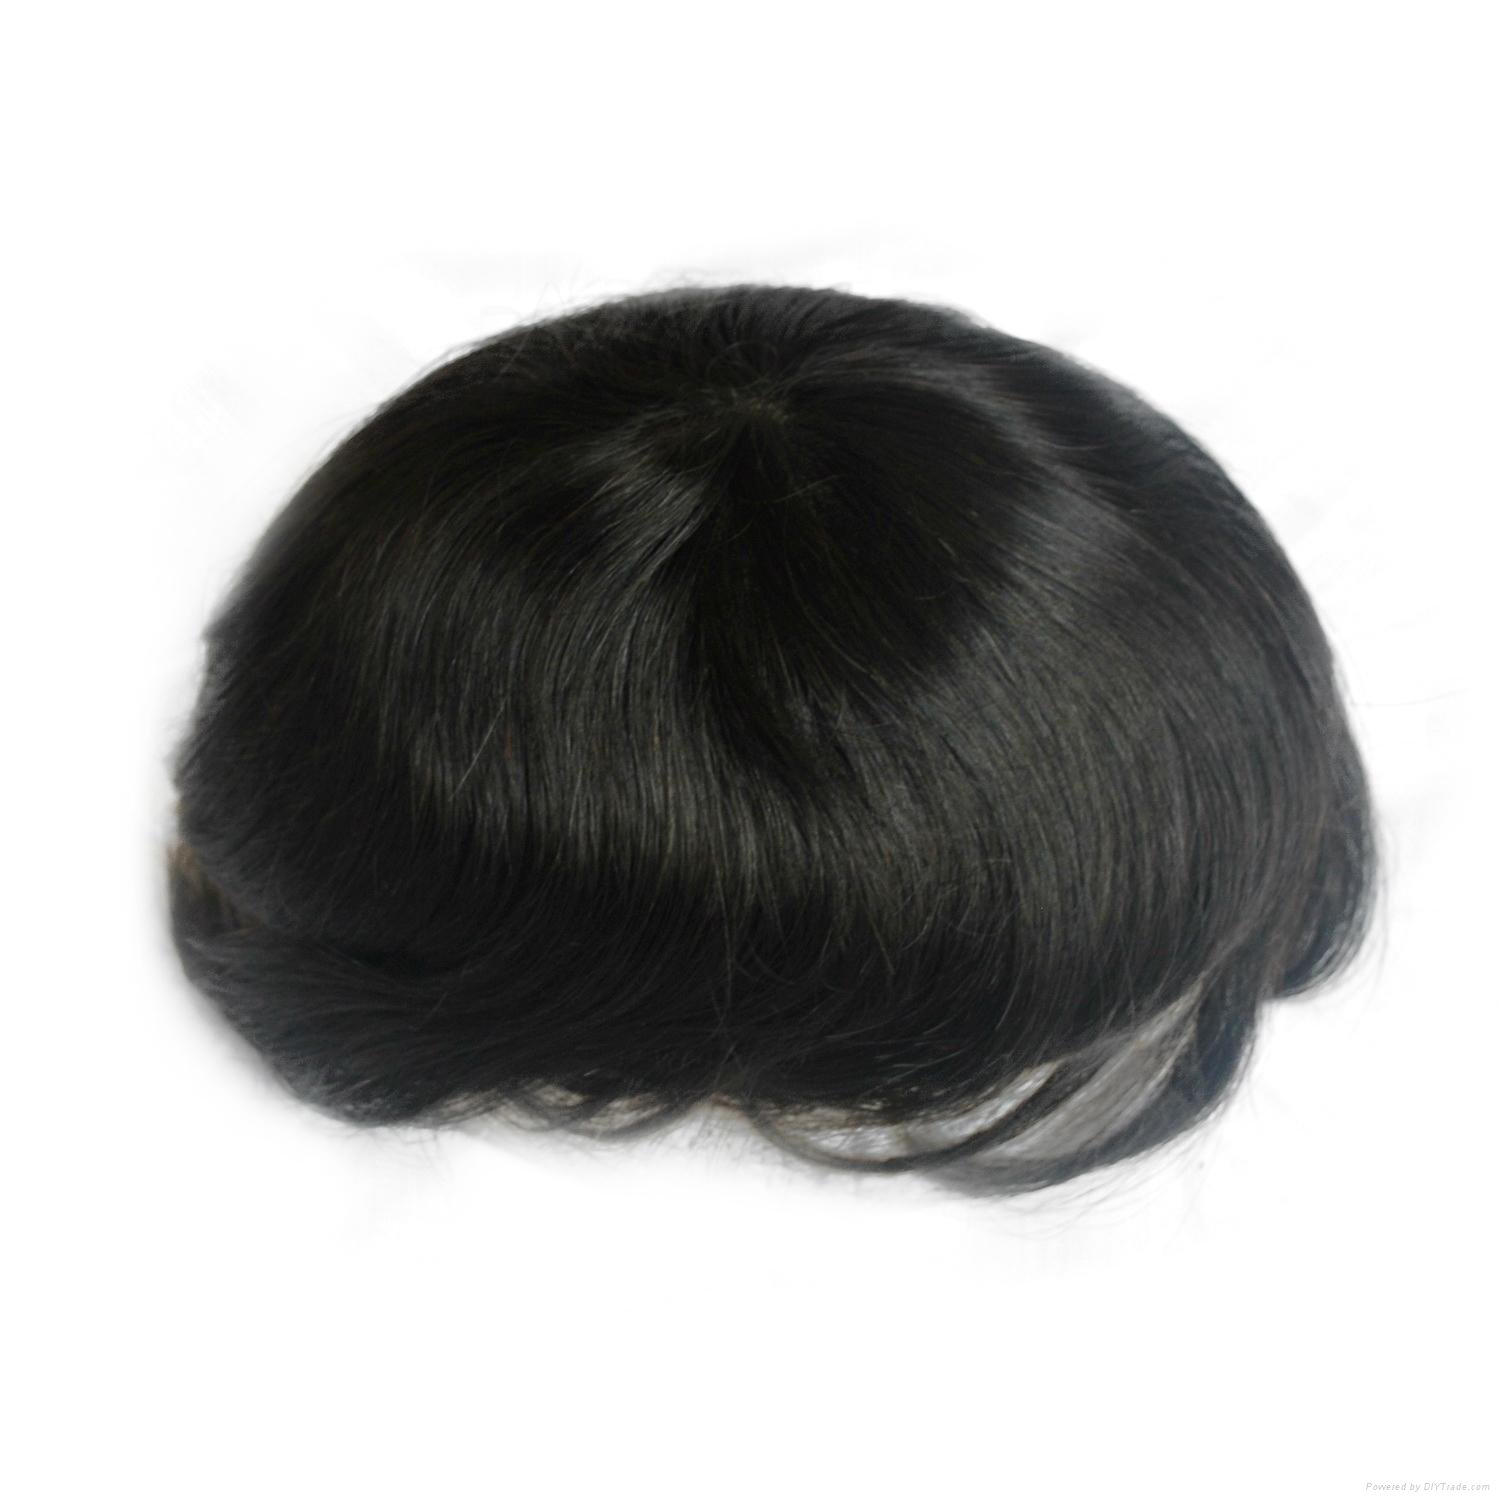 Hair wig for men in stock #1b human hair with pu around 4